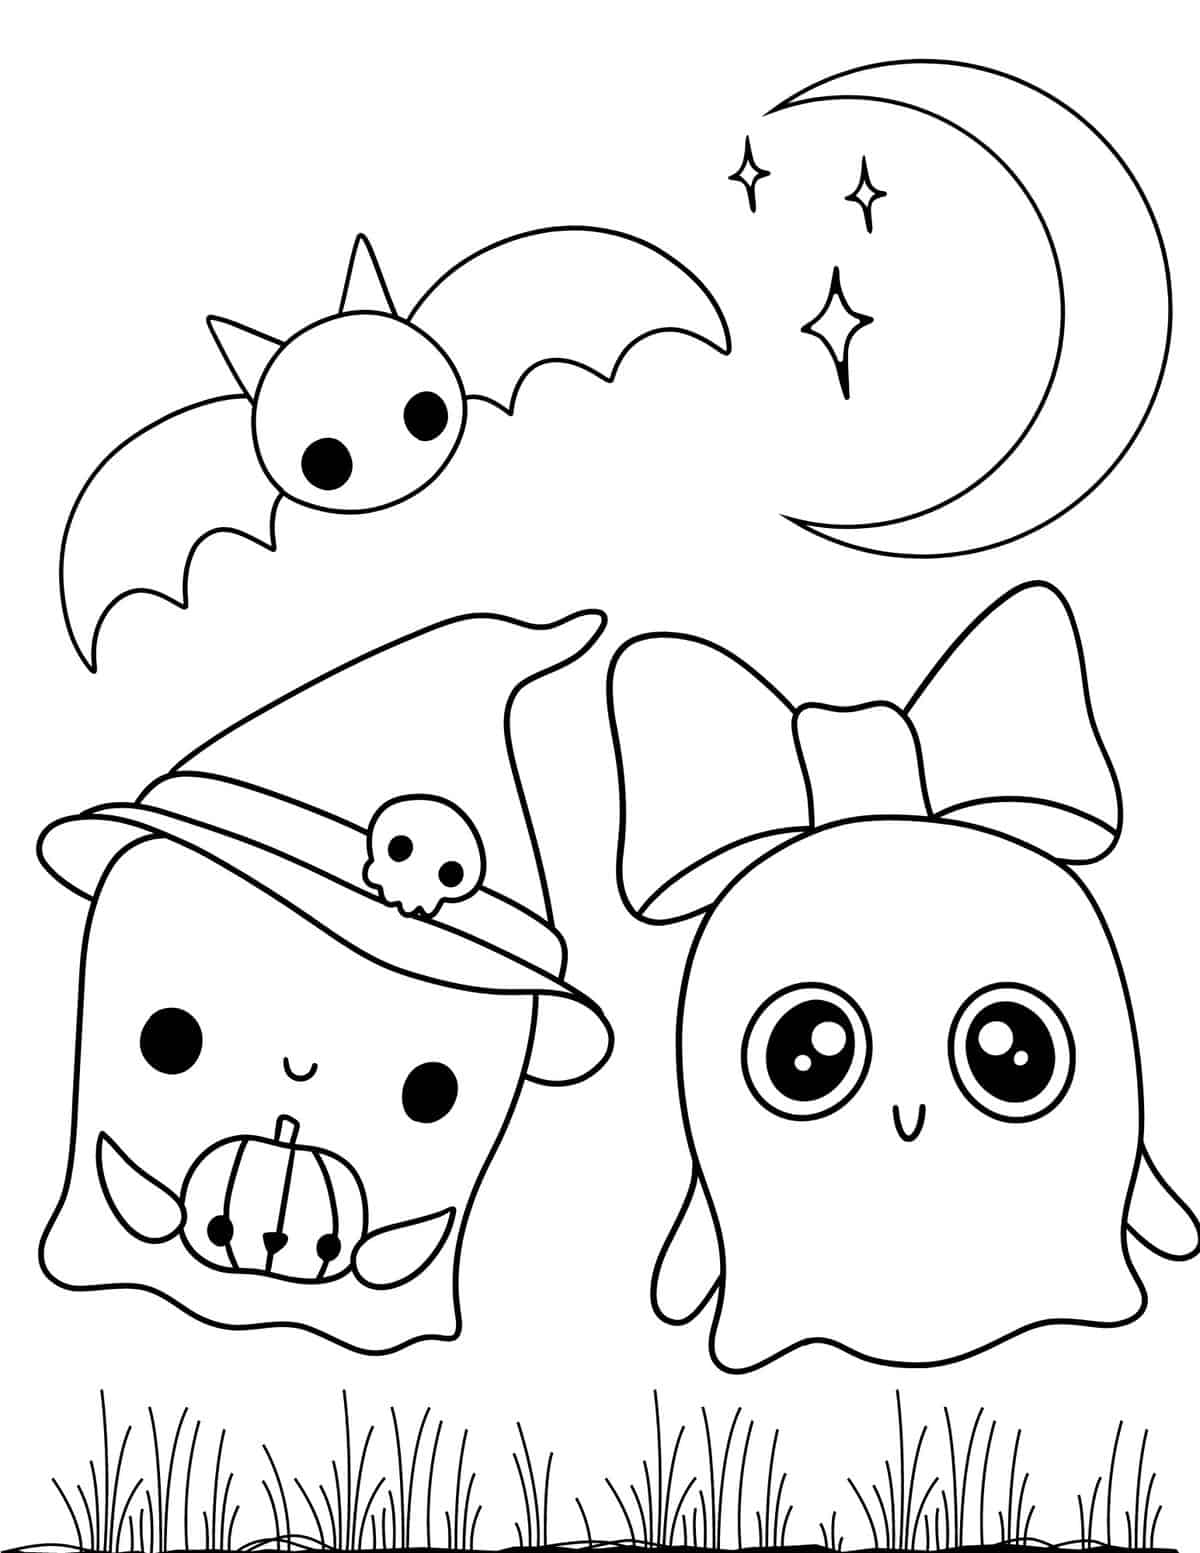 20 Free Halloween Coloring Pages for Kids & Adults   Prudent Penny ...